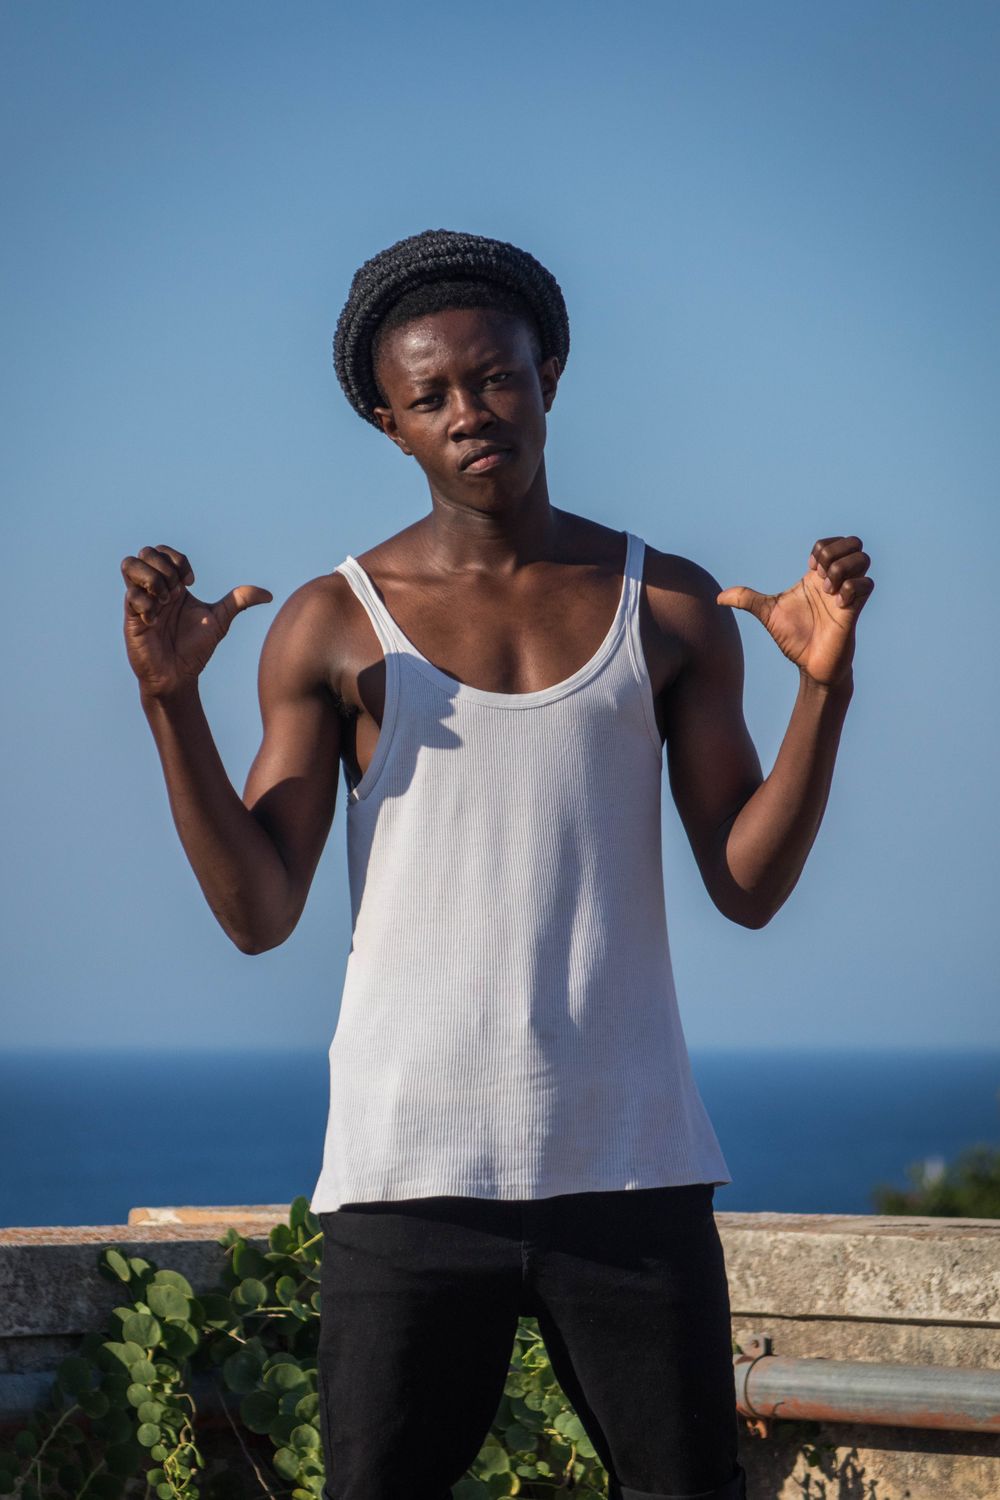 Austin – June 2017, Syracuse, Sicily. Austin, a 17-year-old Nigerian migrant, strikes a pose on the rooftop terrace of Umberto Primo. The Mediterranean Sea, which he bravely crossed, is in the background. Austin was a passionate dancer at the camp music sessions and concerts. 